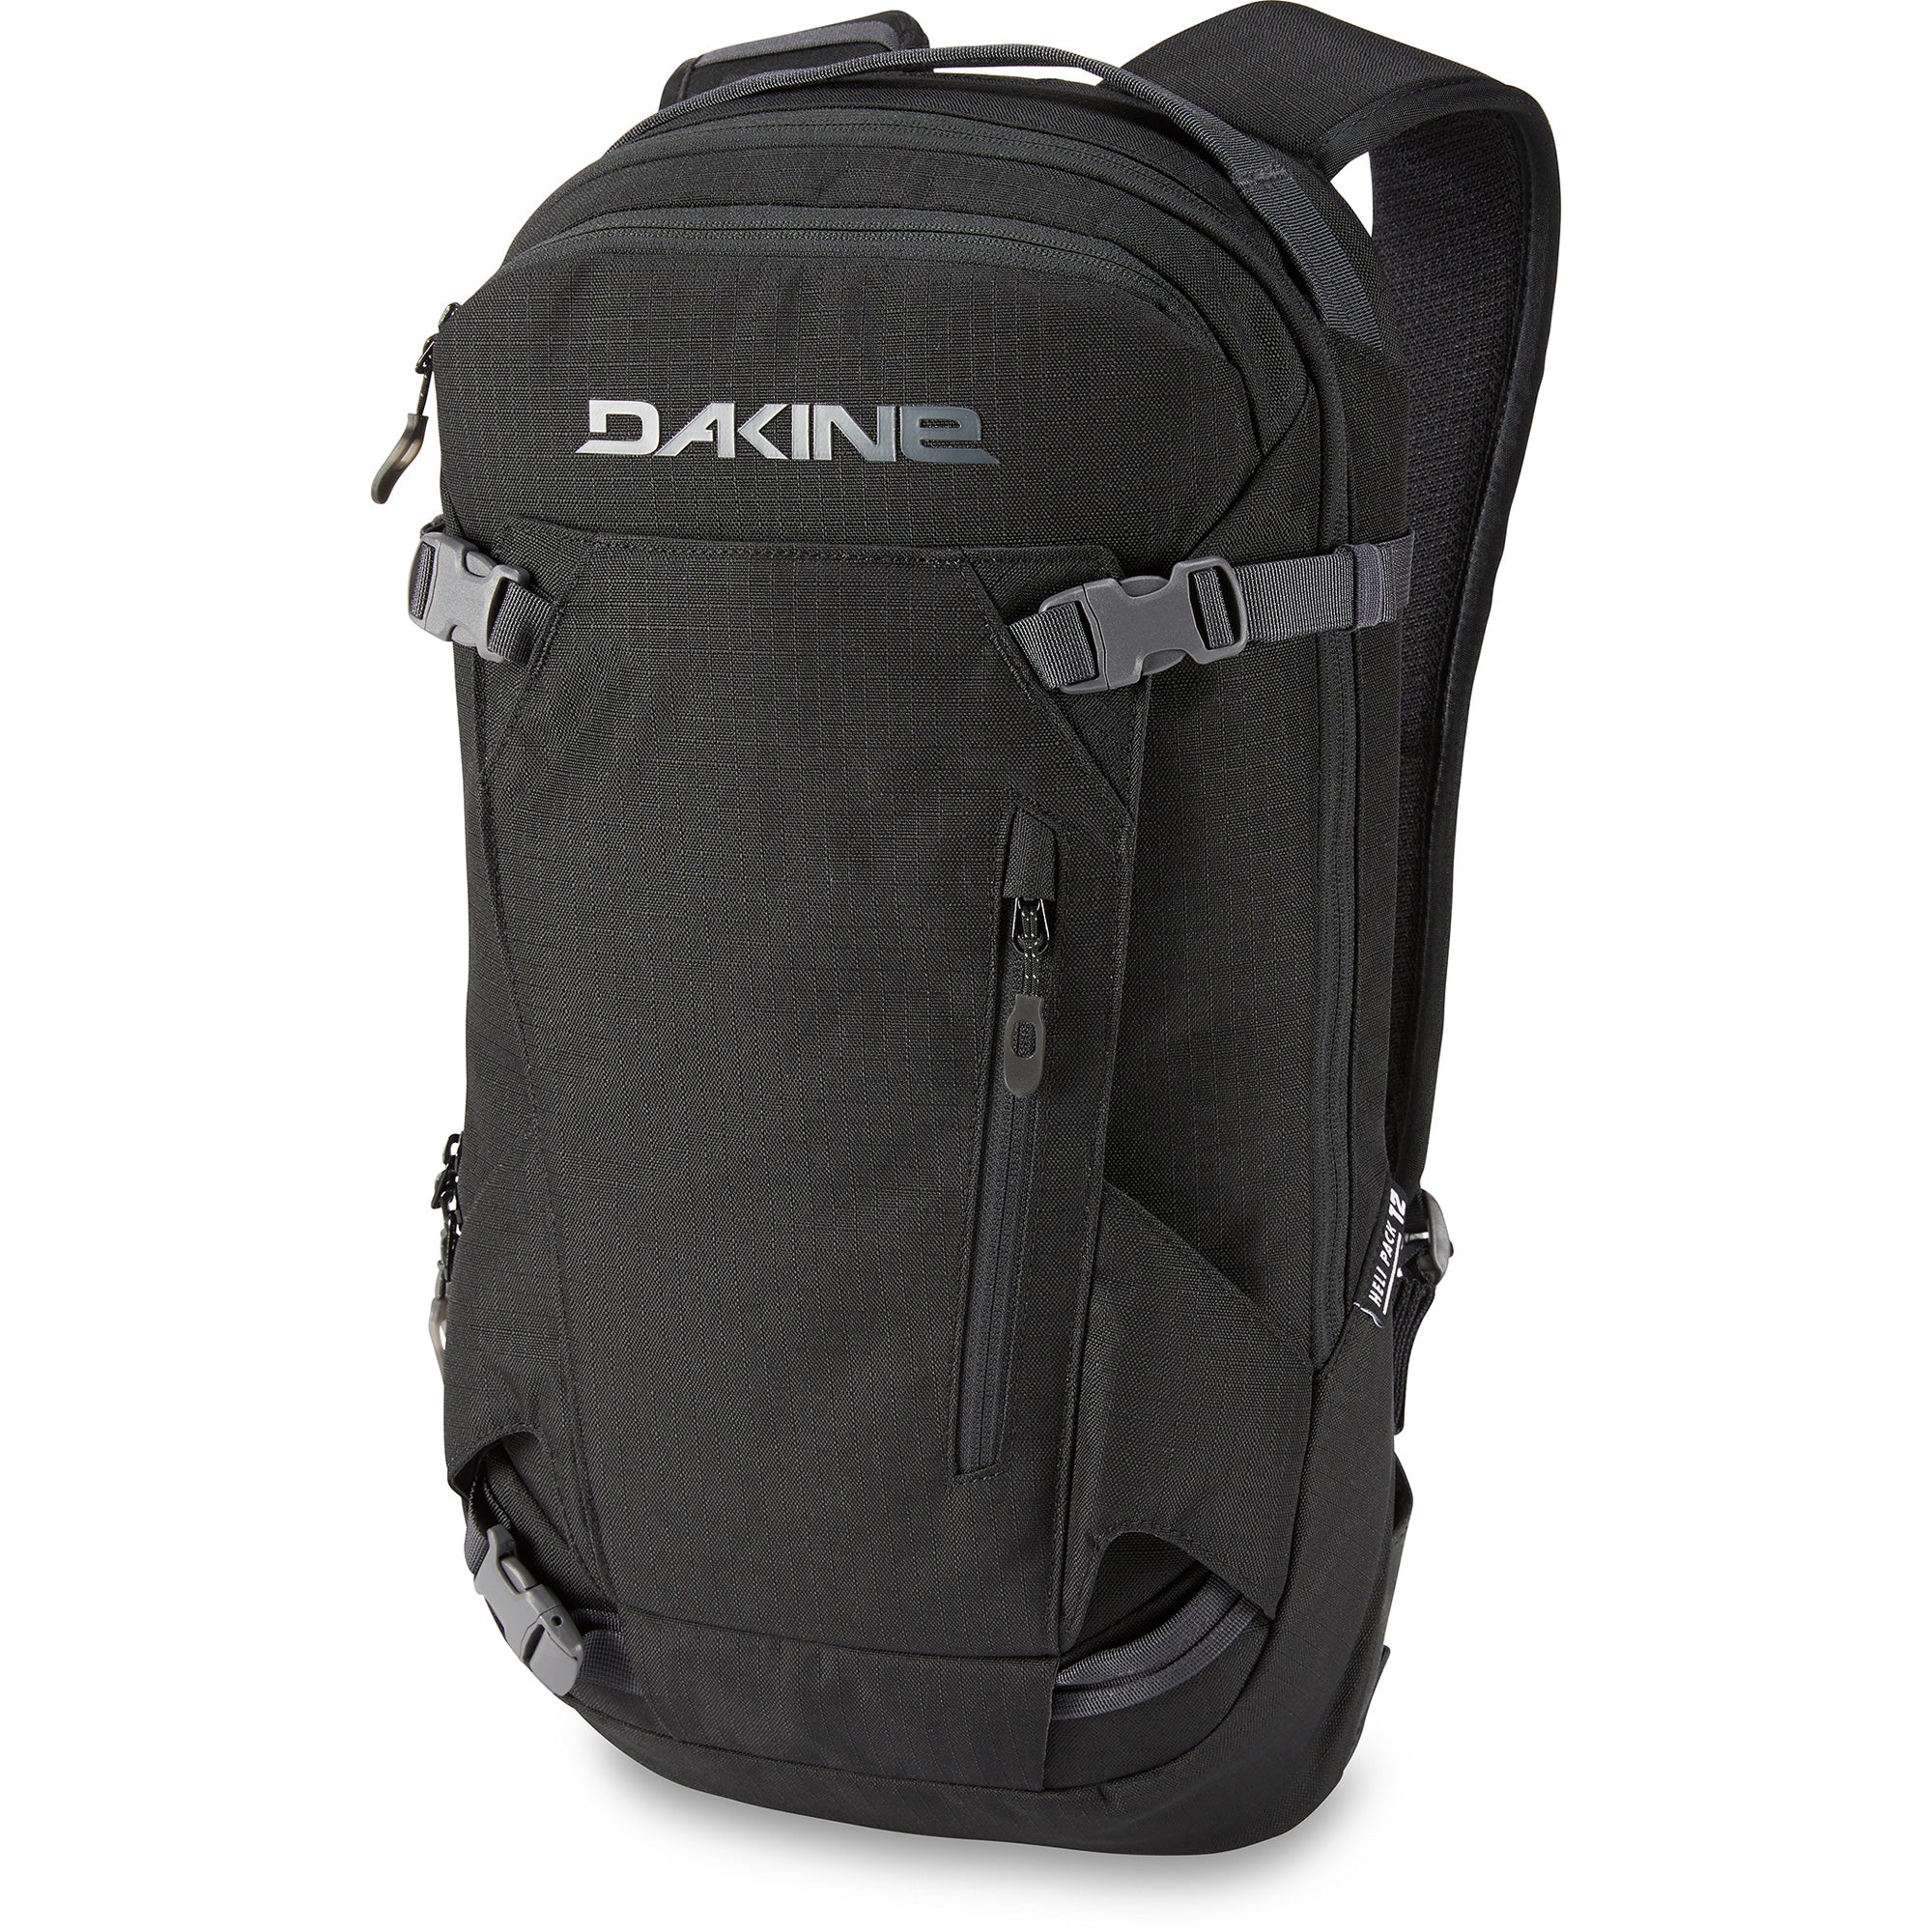 Unlock Wilderness' choice in the Dakine Vs North Face comparison, the HeliPack 12L Backpack by Dakine